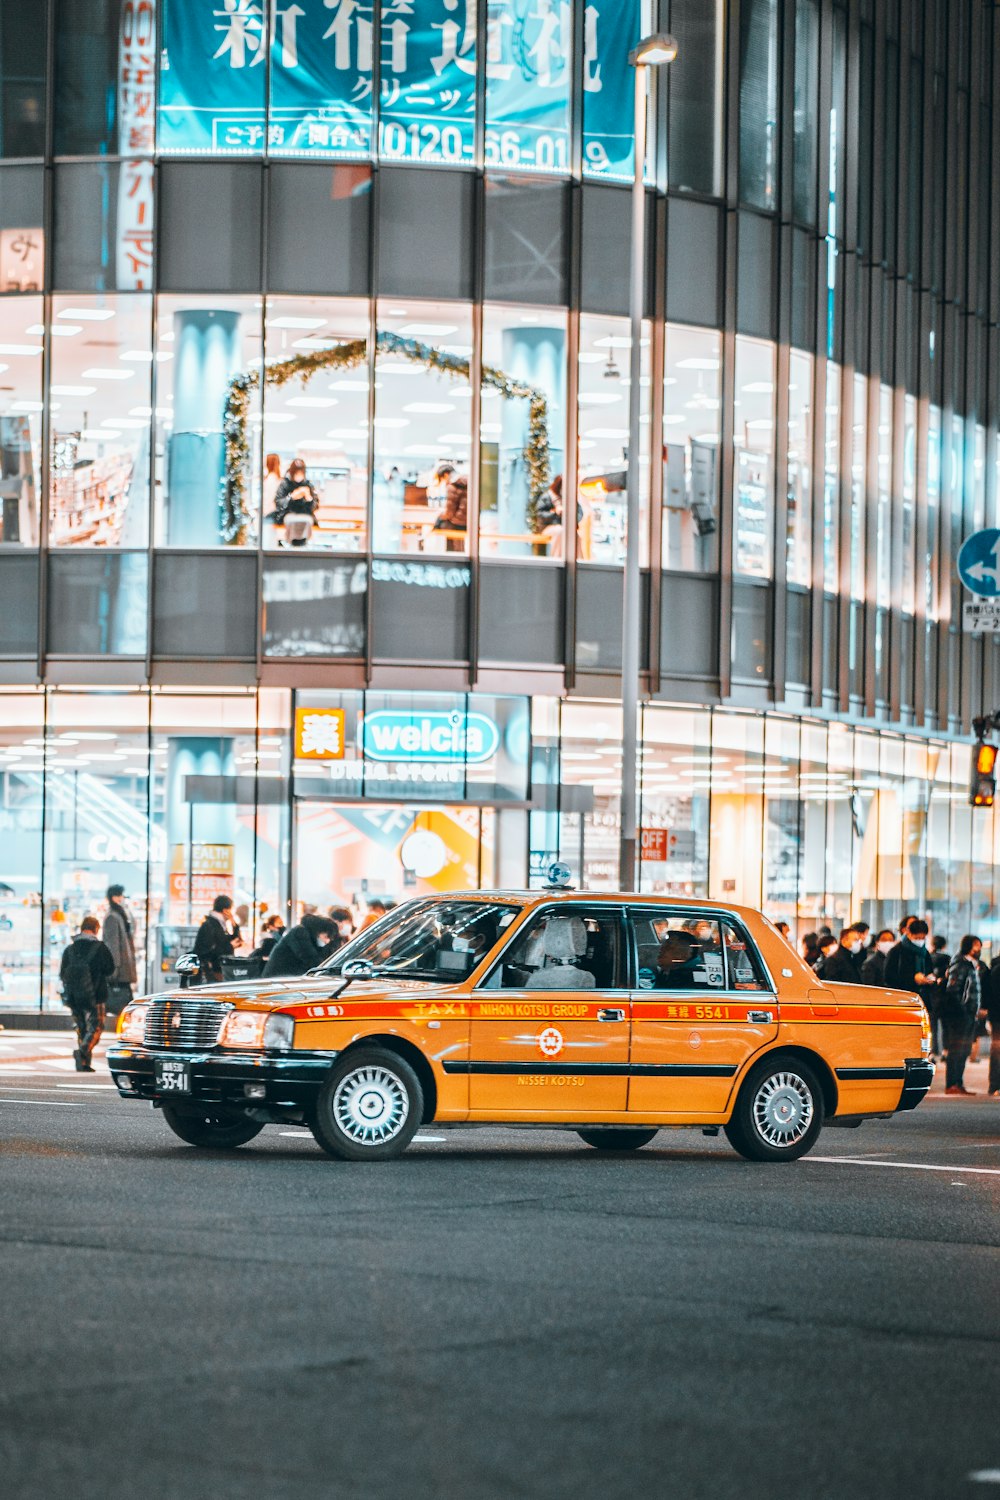 an orange taxi cab driving down a street at night